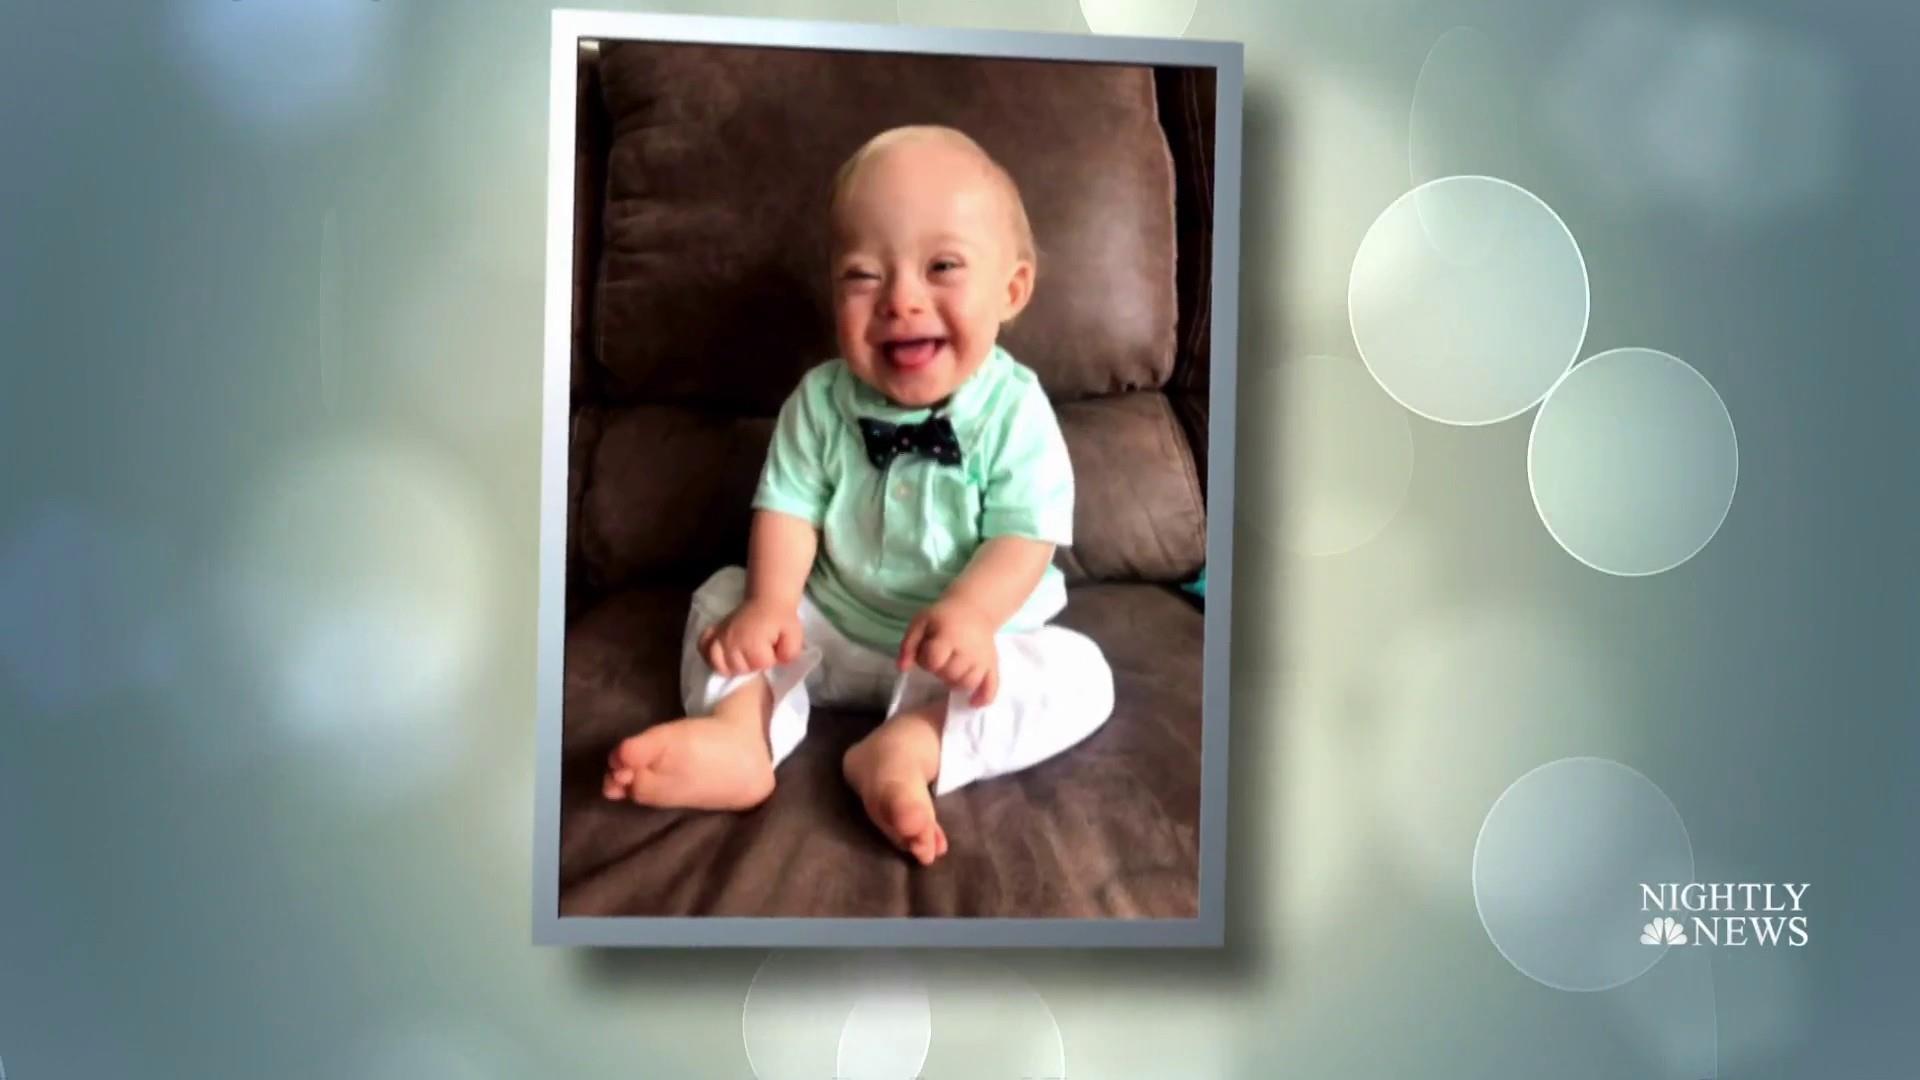 This year's Gerber baby has Down syndrome